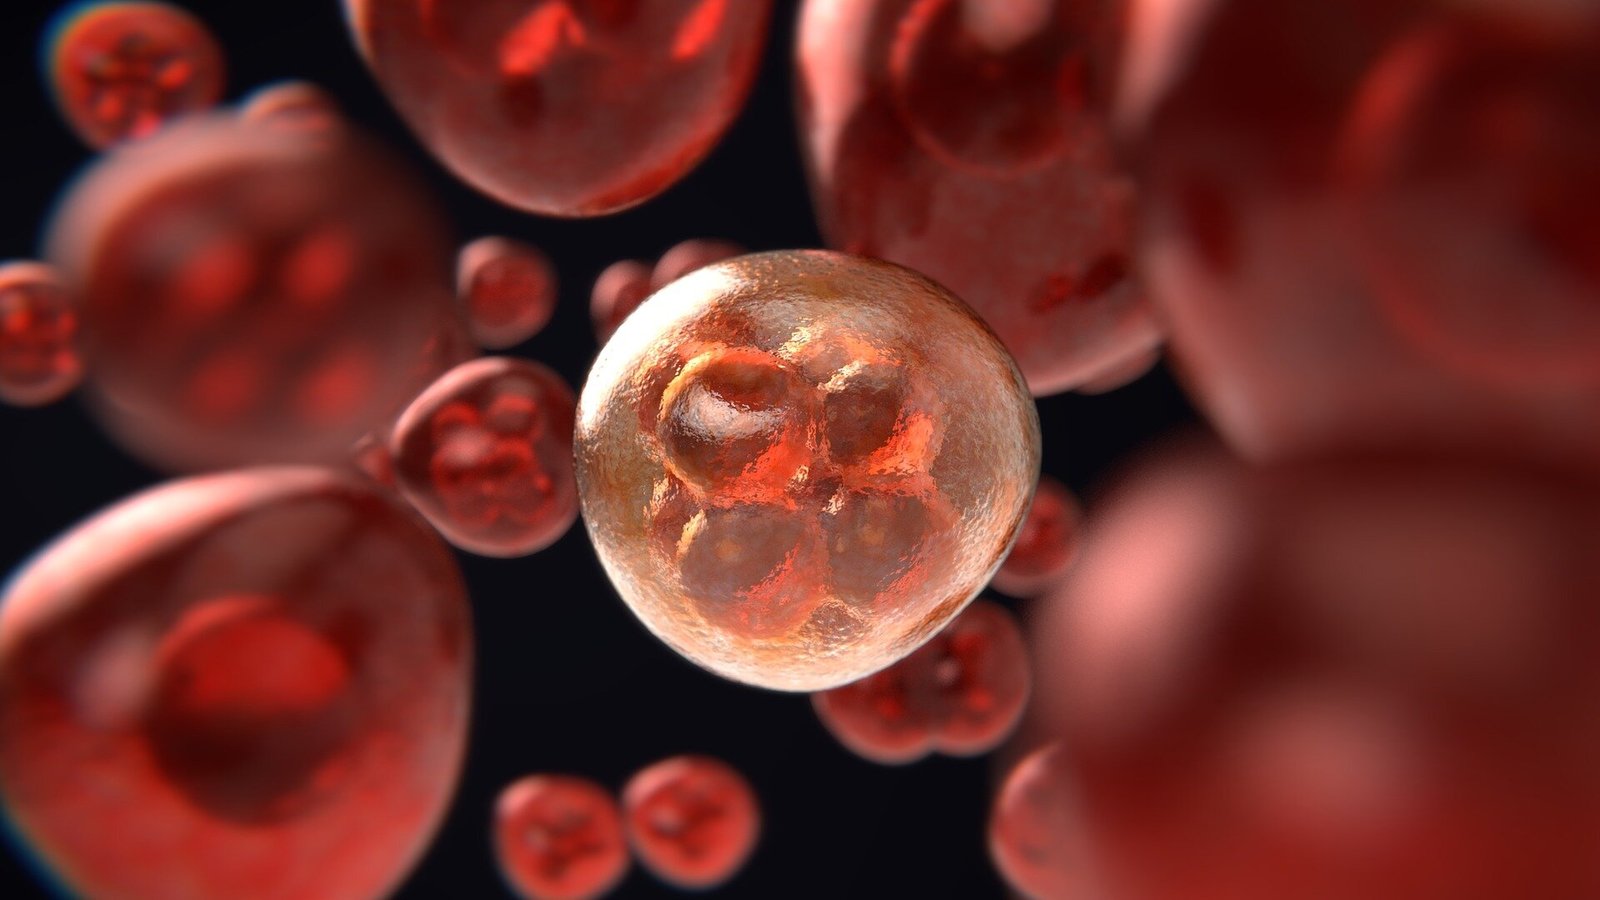 Role of inherited genetic variants in rare blood cancer uncovered